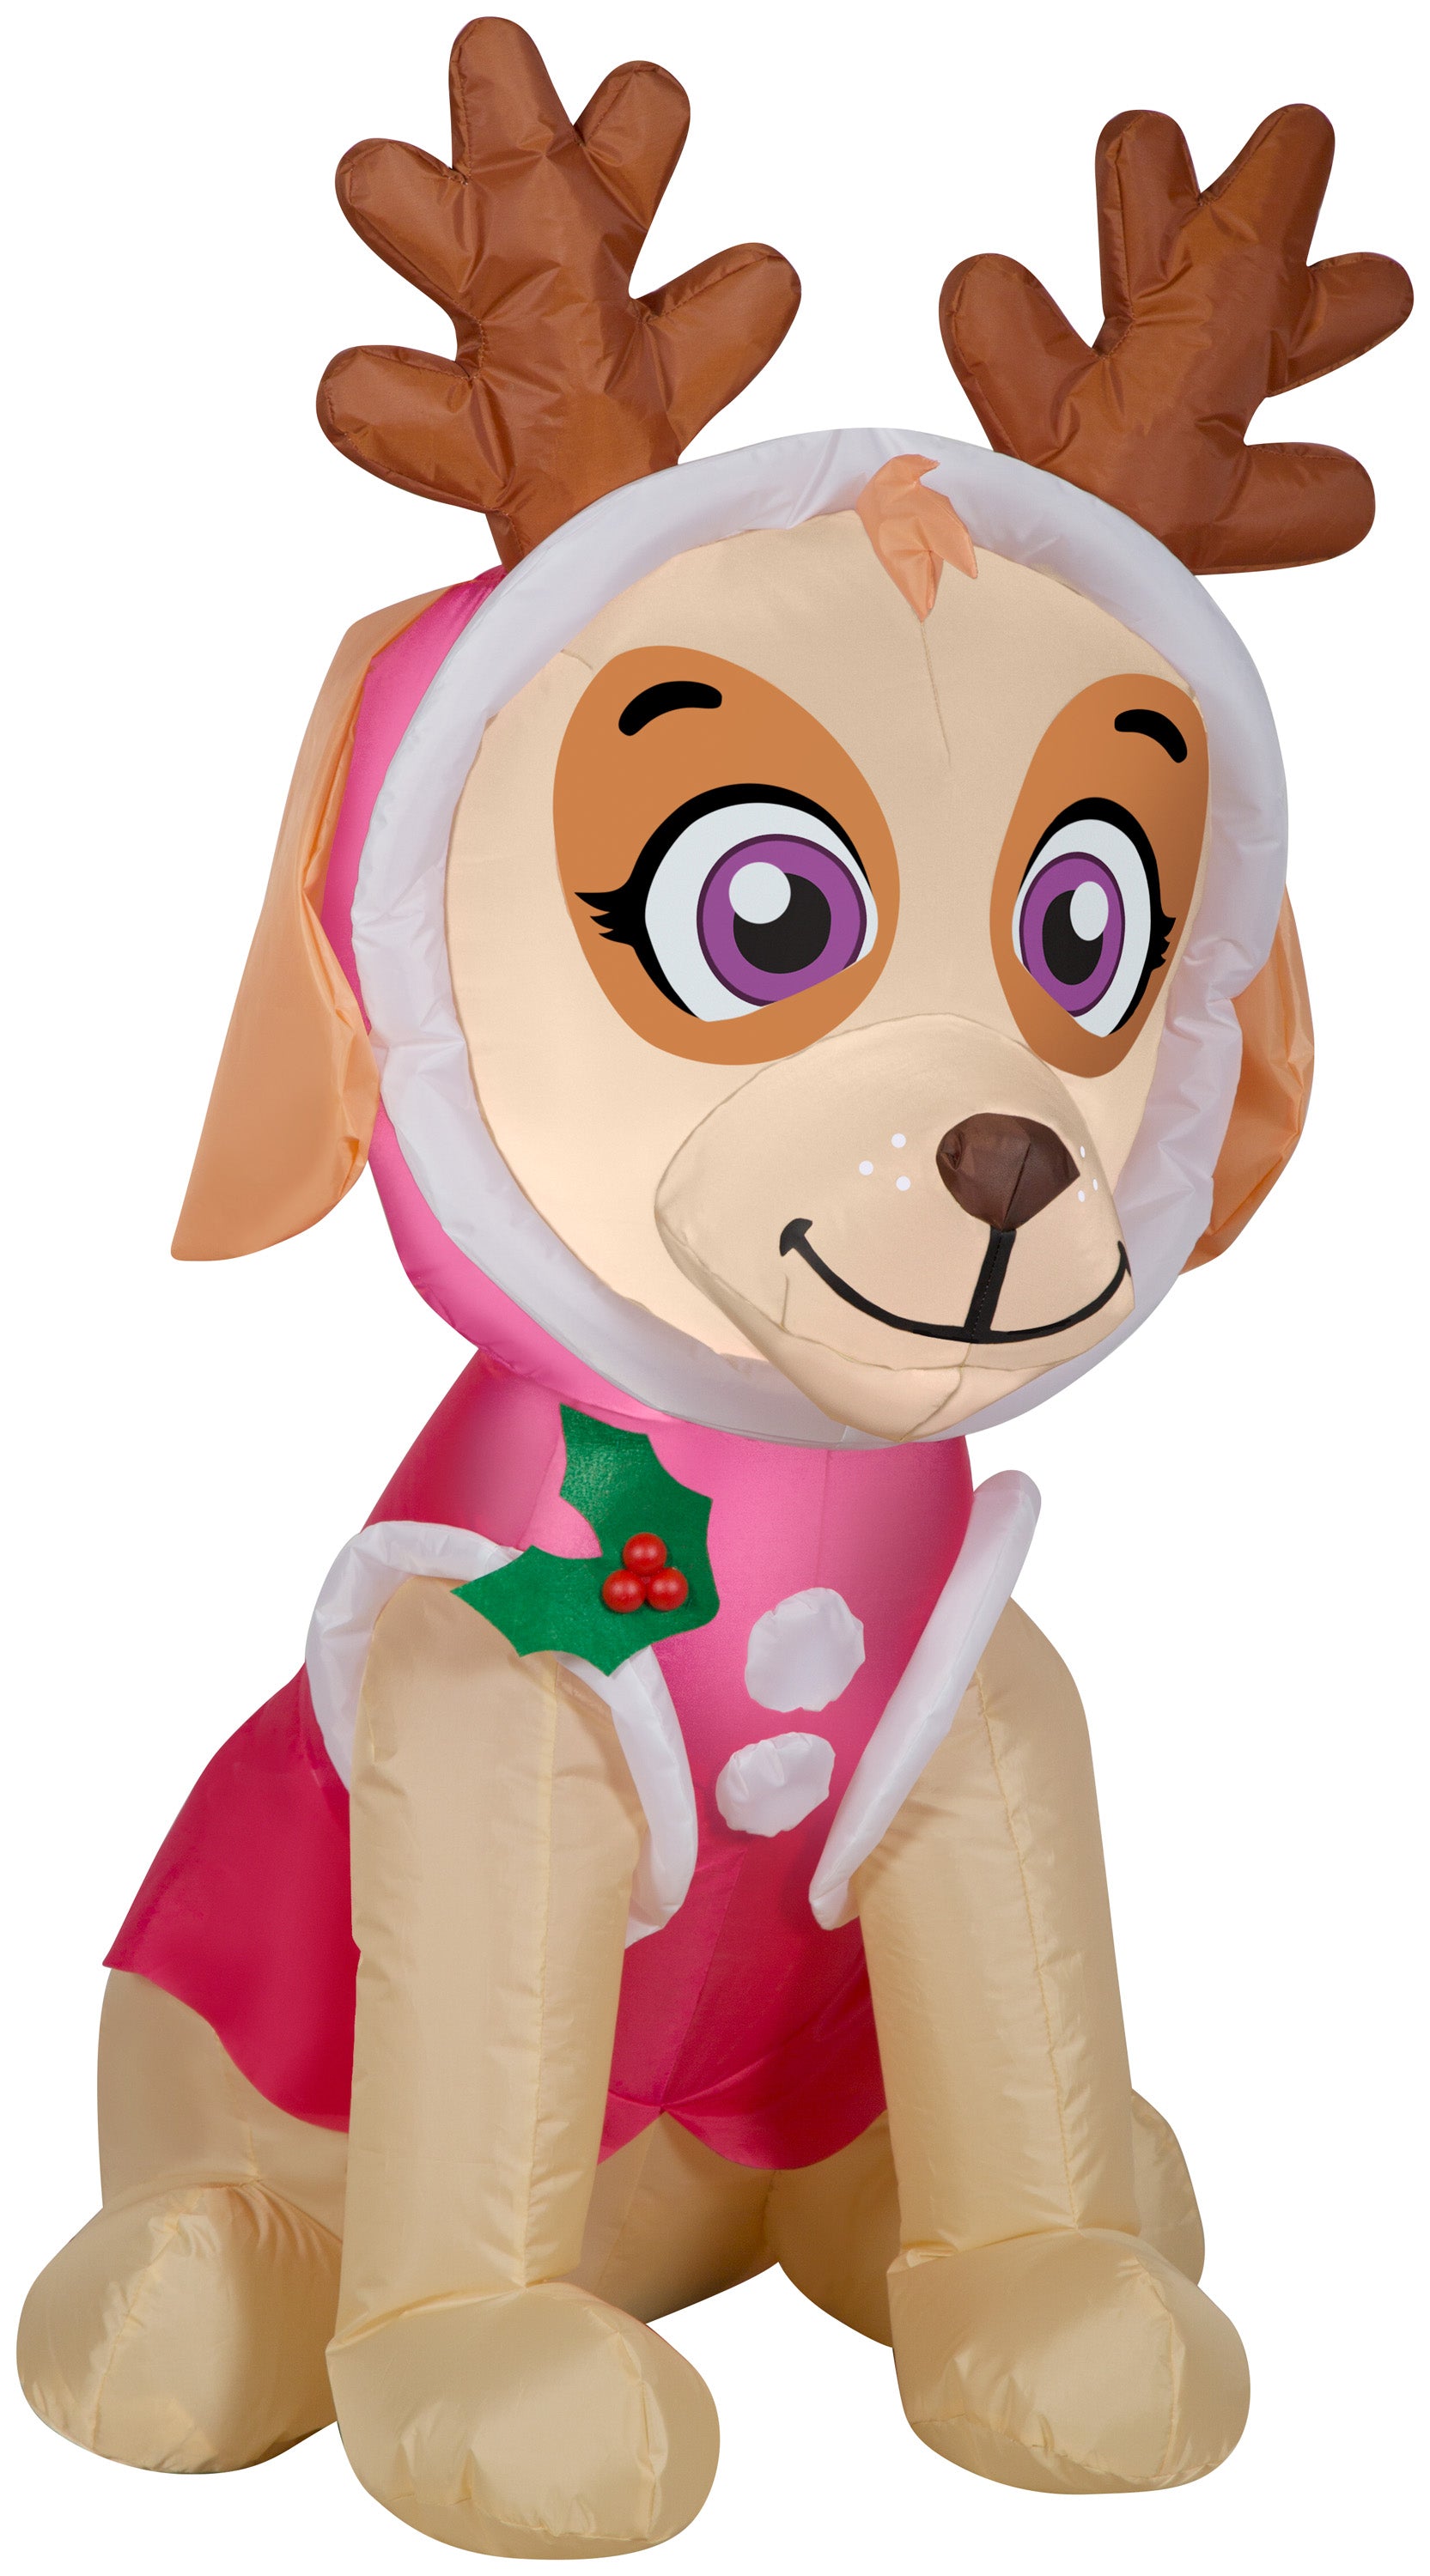 Gemmy Christmas Airblown Inflatable Skye in Pink Snow Outfit w/Antlers Nick, 3.5 ft Tall, pink